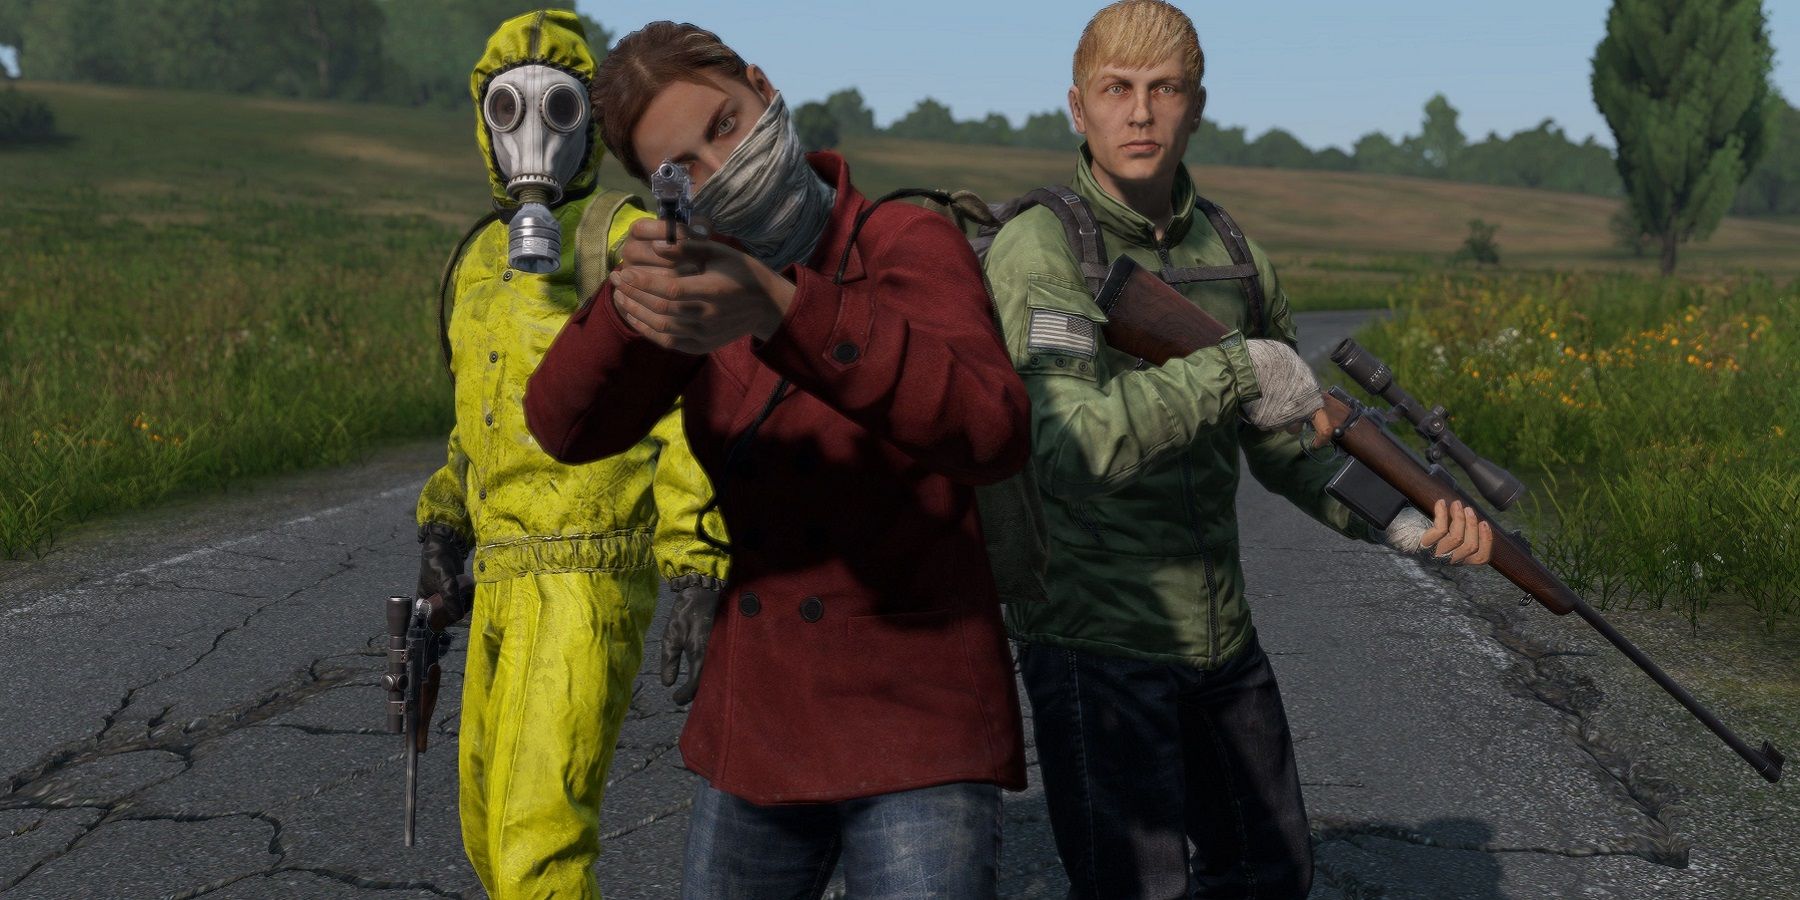 Screenshot from DayZ showing three survivors, one of whom is pointing a gun at the camera.